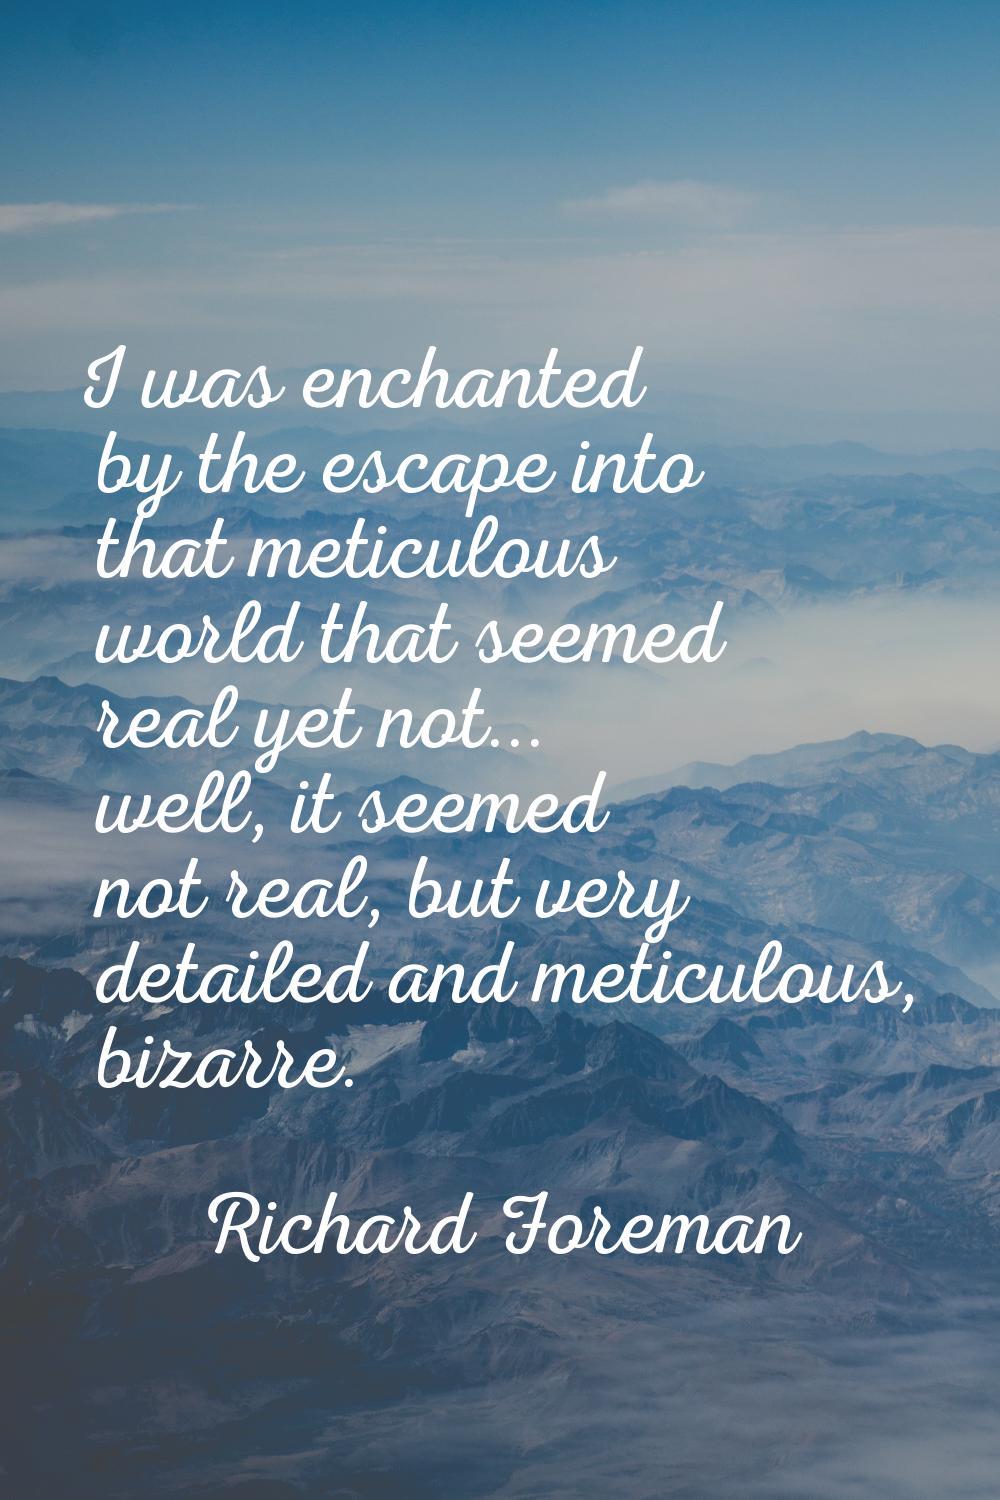 I was enchanted by the escape into that meticulous world that seemed real yet not... well, it seeme